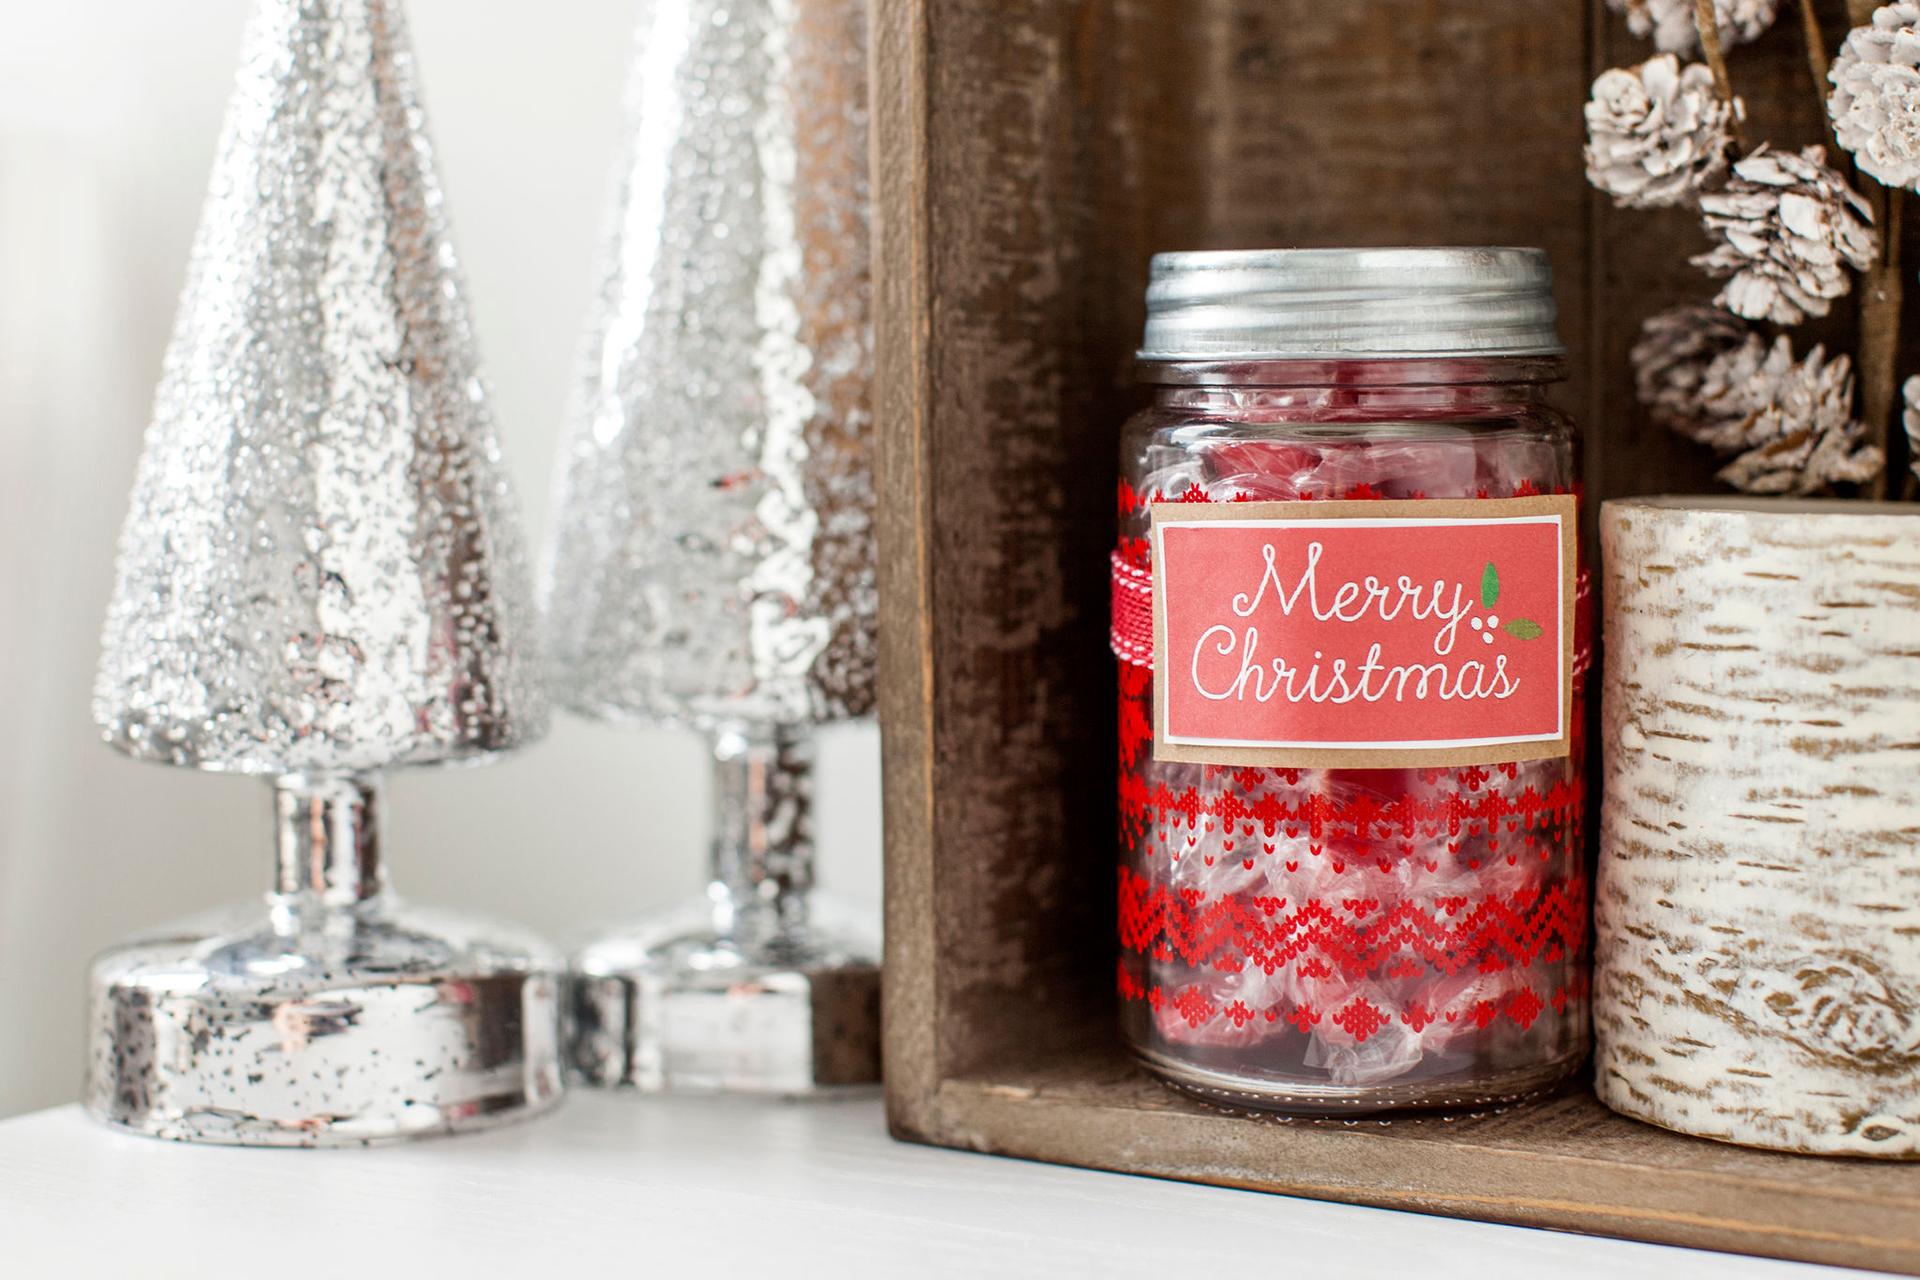 Crafting cheer: 4 festive Christmas projects